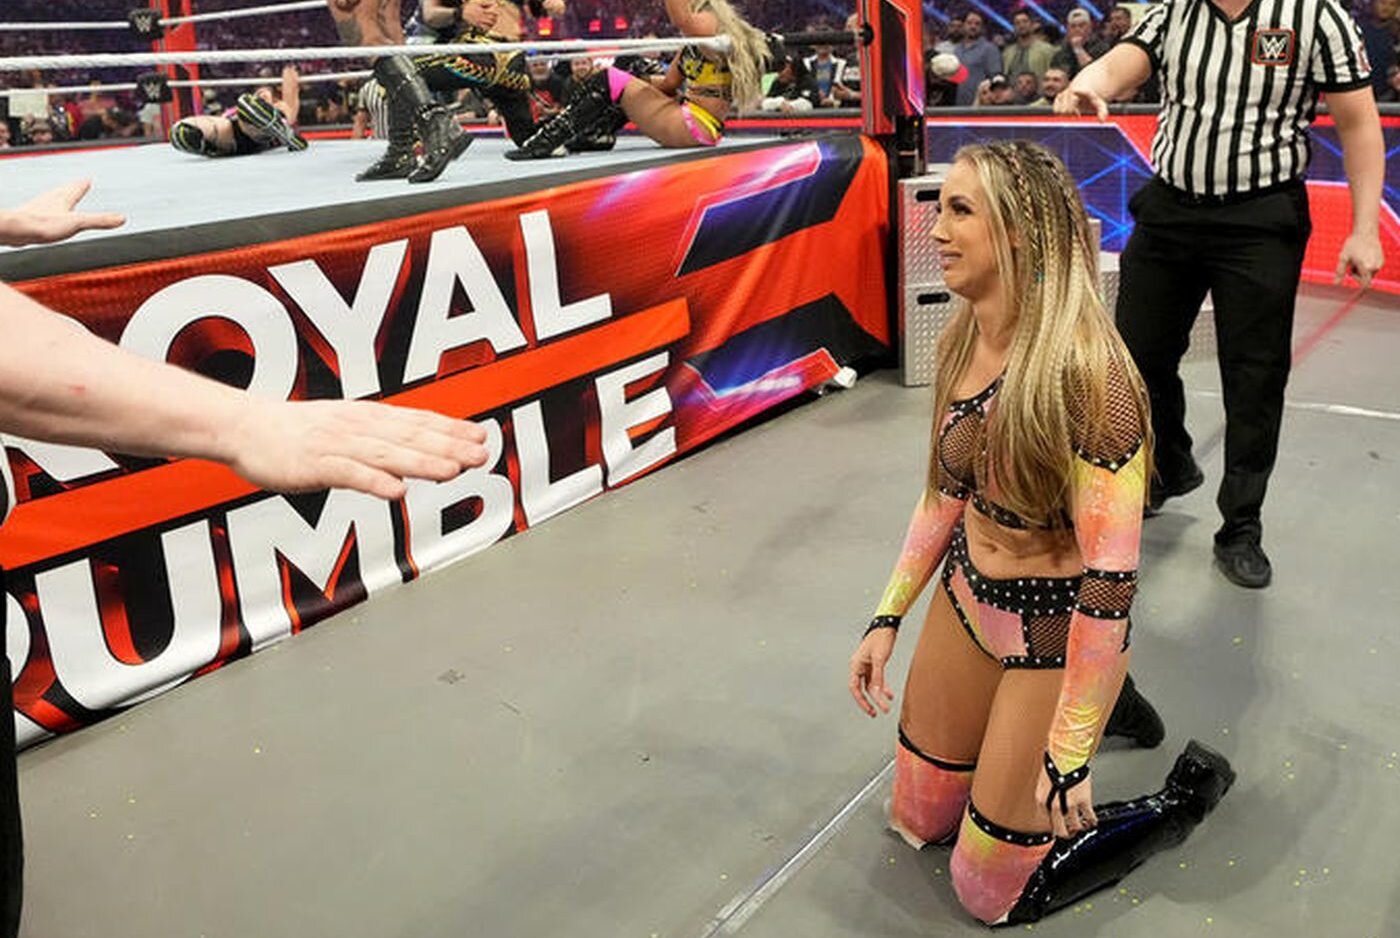 List of quickest eliminations in WWE Women’s Royal Rumble